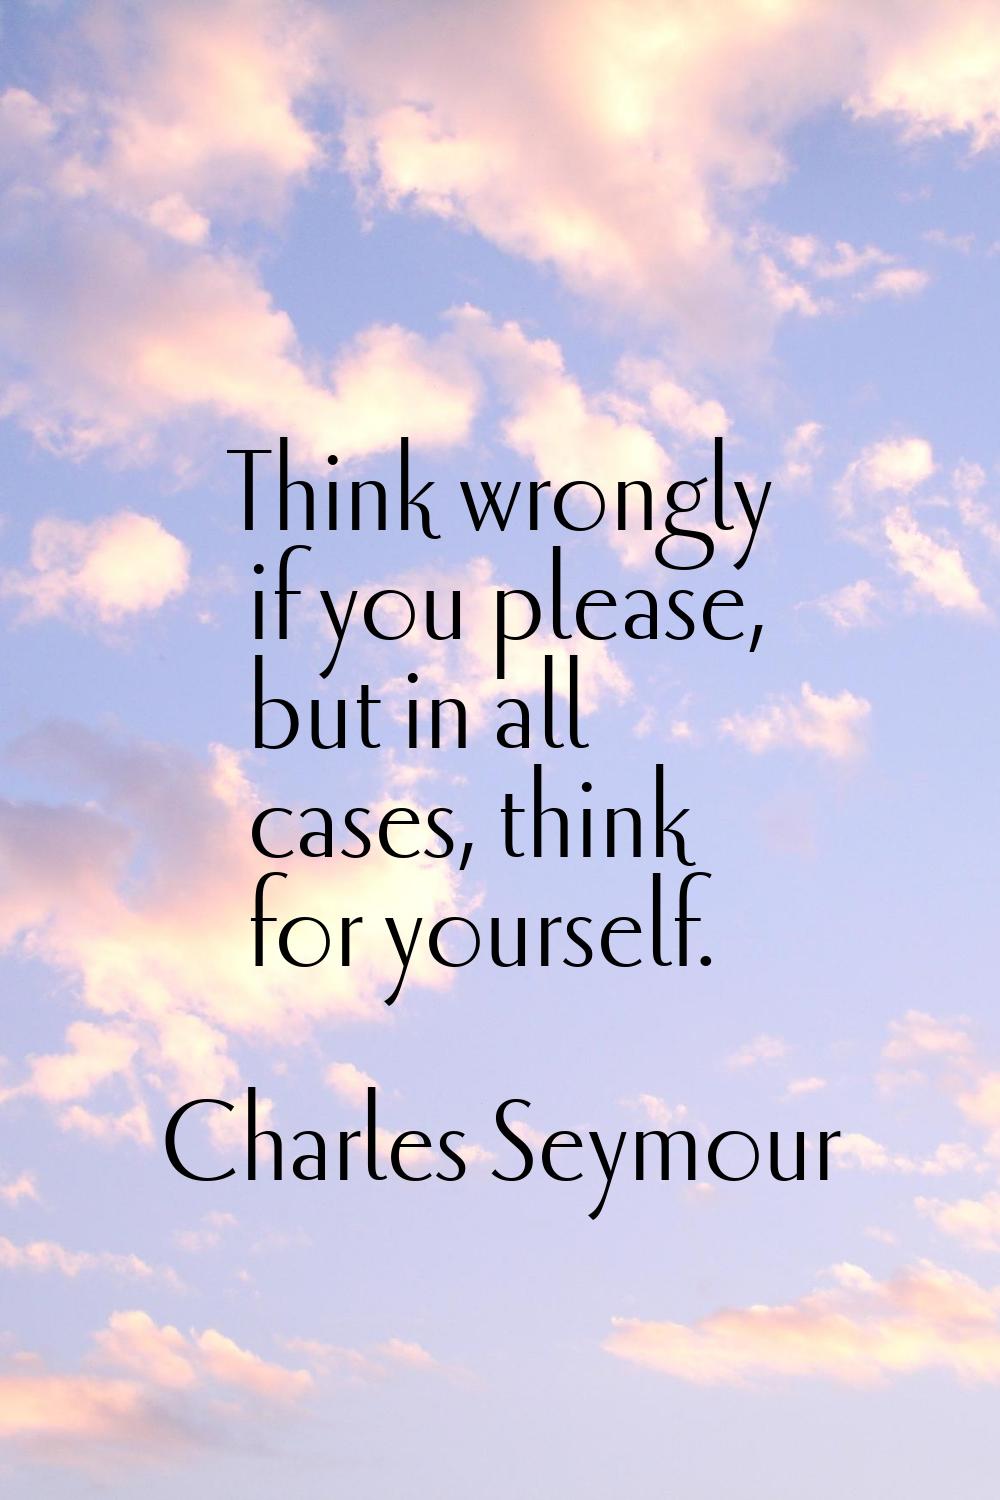 Think wrongly if you please, but in all cases, think for yourself.